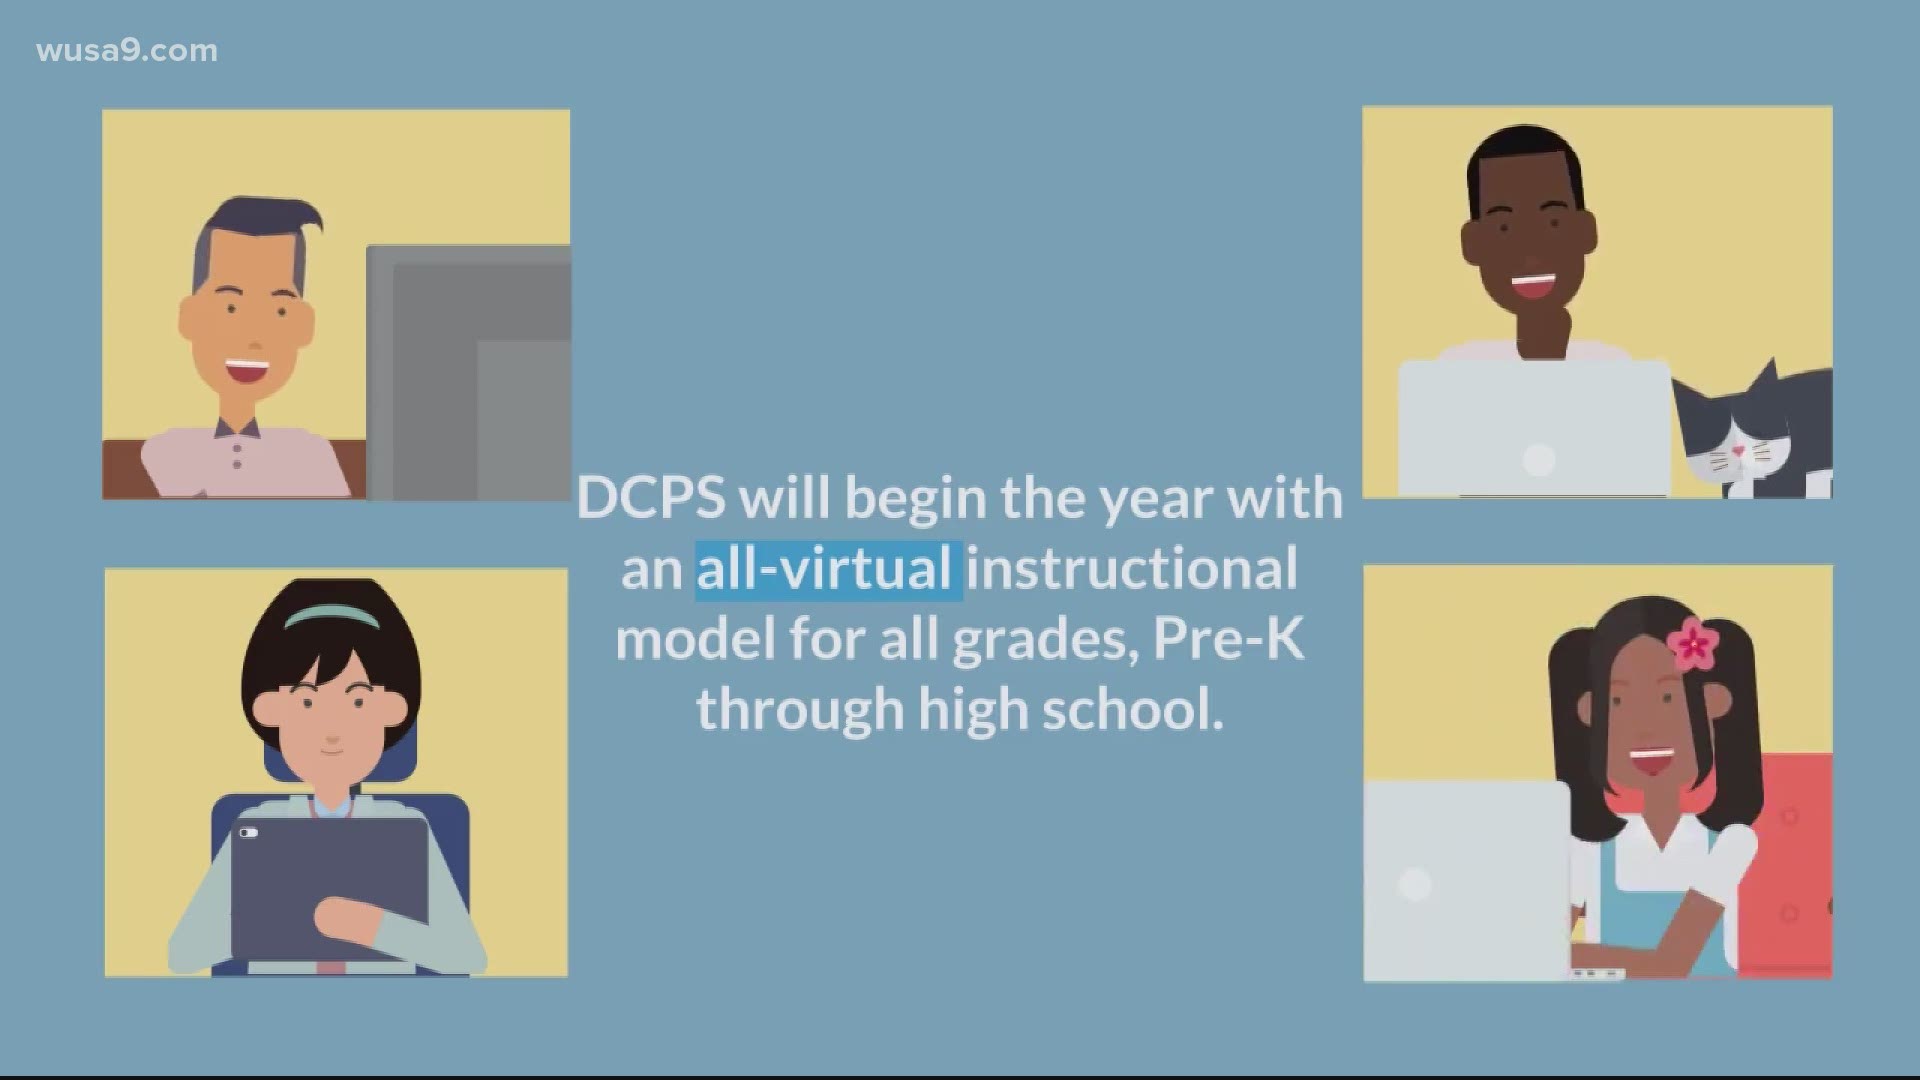 As kids and parents gear up to go back to school this month, this article explains more about what a typical day will look like for students in D.C.